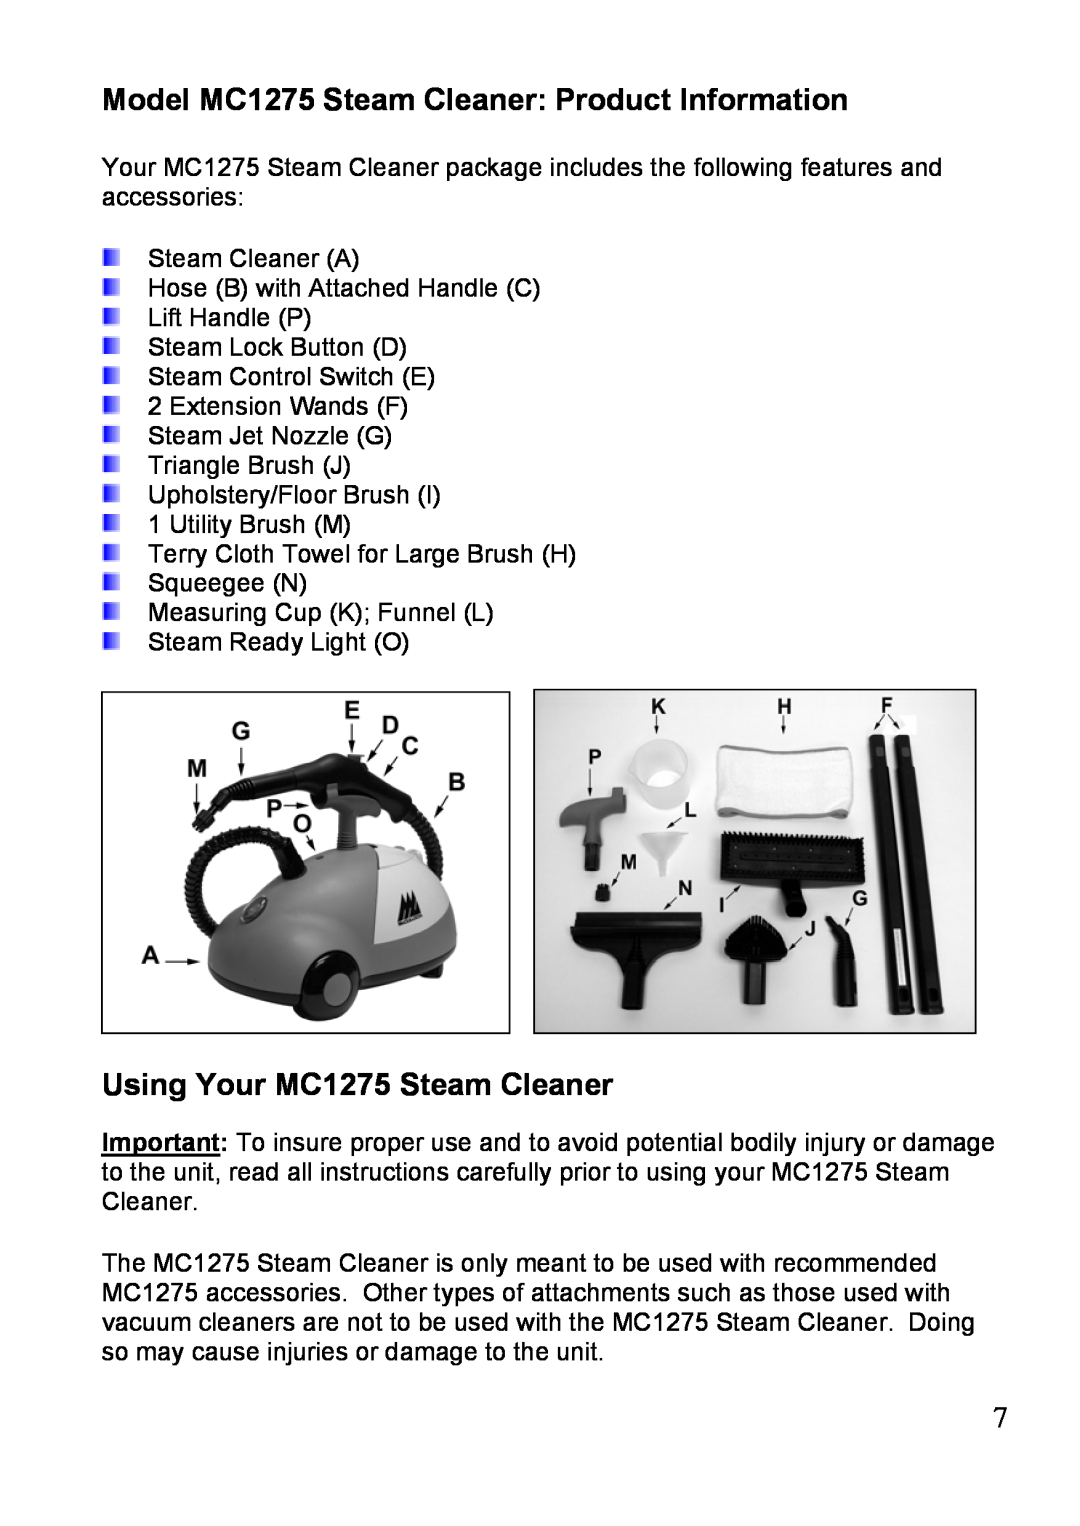 Top Innovations owner manual Model MC1275 Steam Cleaner Product Information, Using Your MC1275 Steam Cleaner 